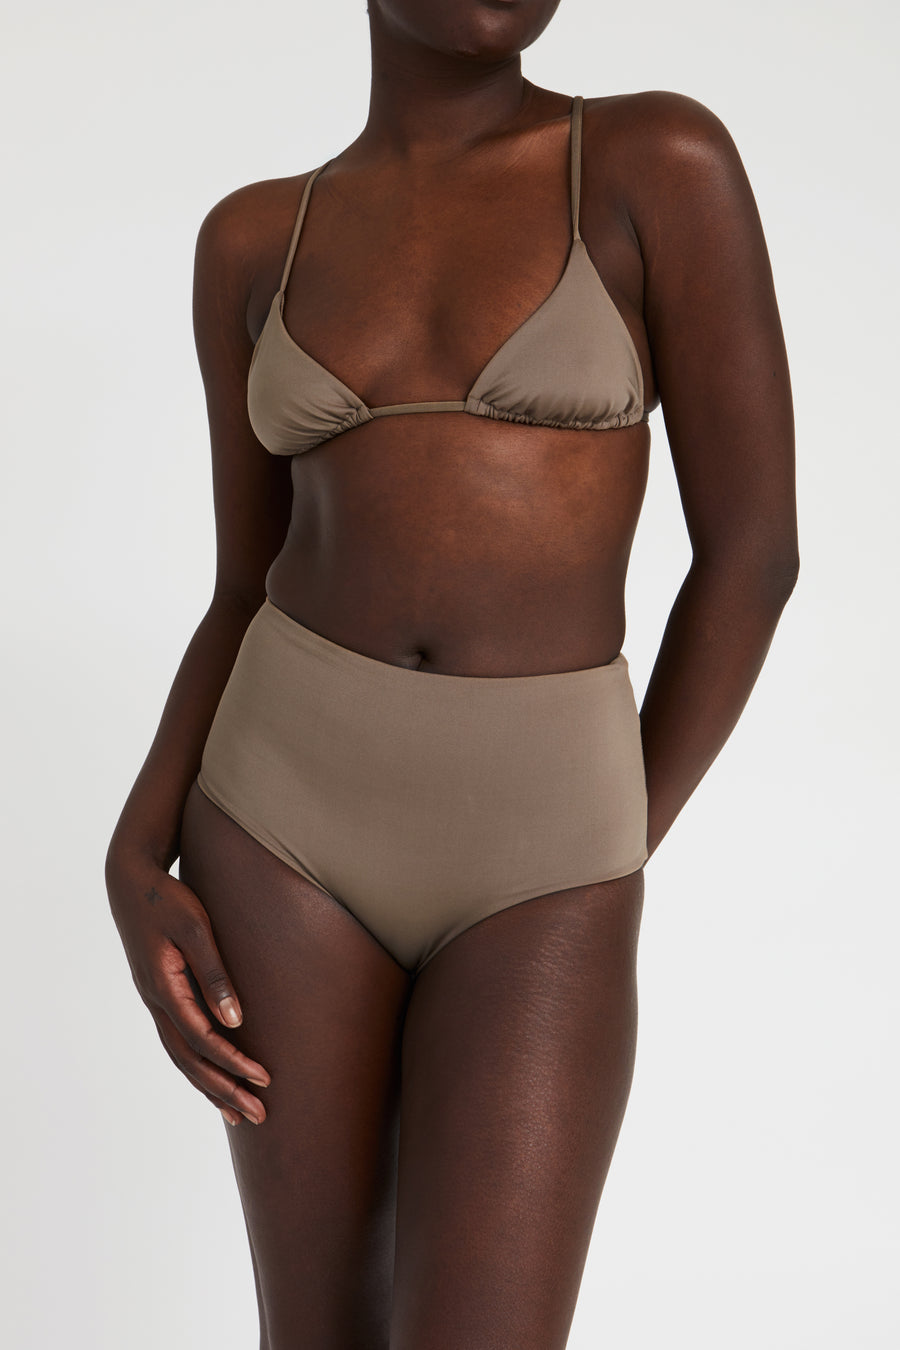 TOP – triangle, brown